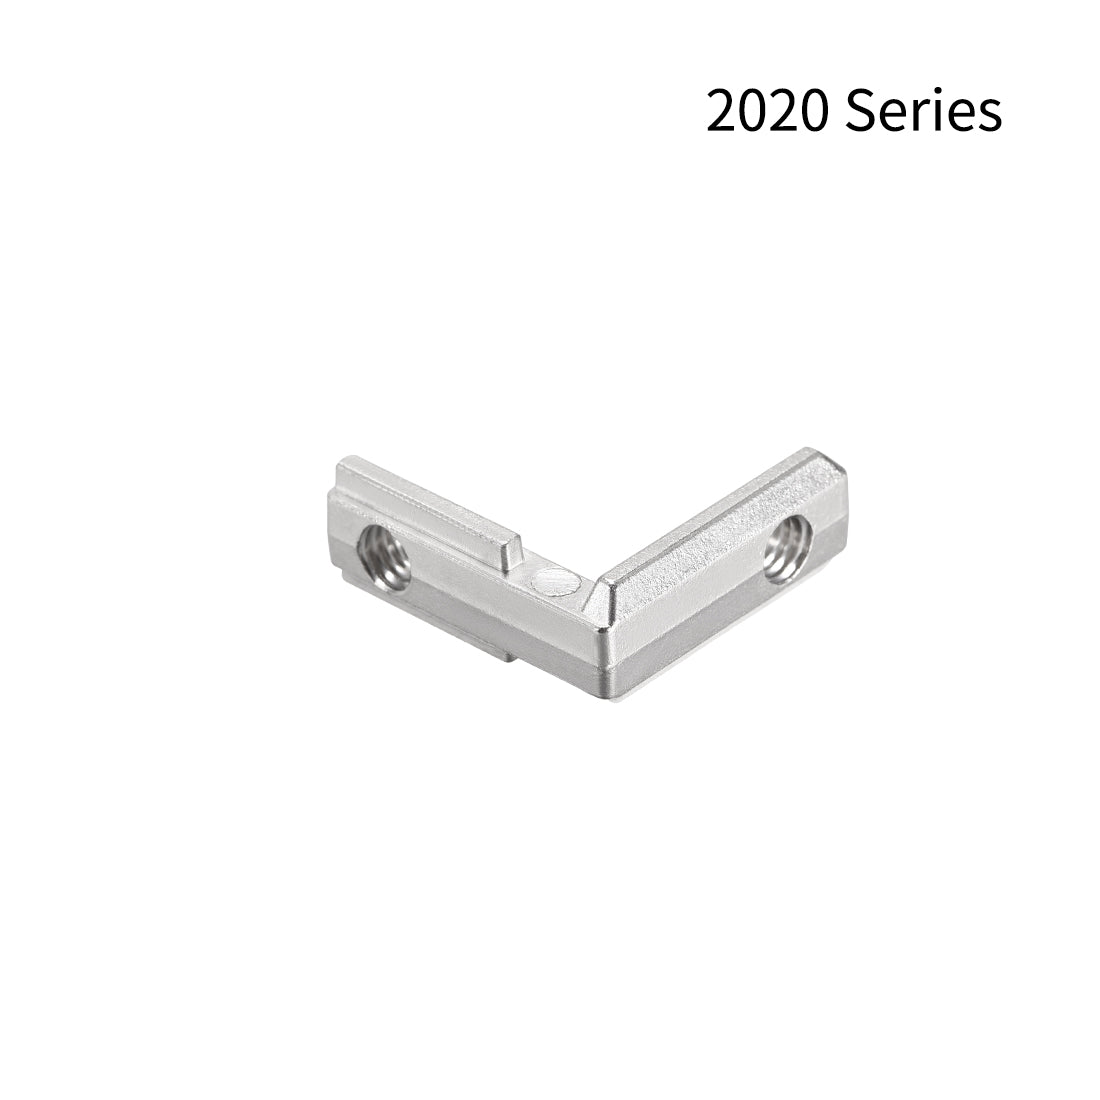 Uxcell Uxcell Interior Joint Bracket, Inside Corner Connector 2020 Series Slot 6mm with Screws for Aluminum Extrusion Profile, 20 Pcs